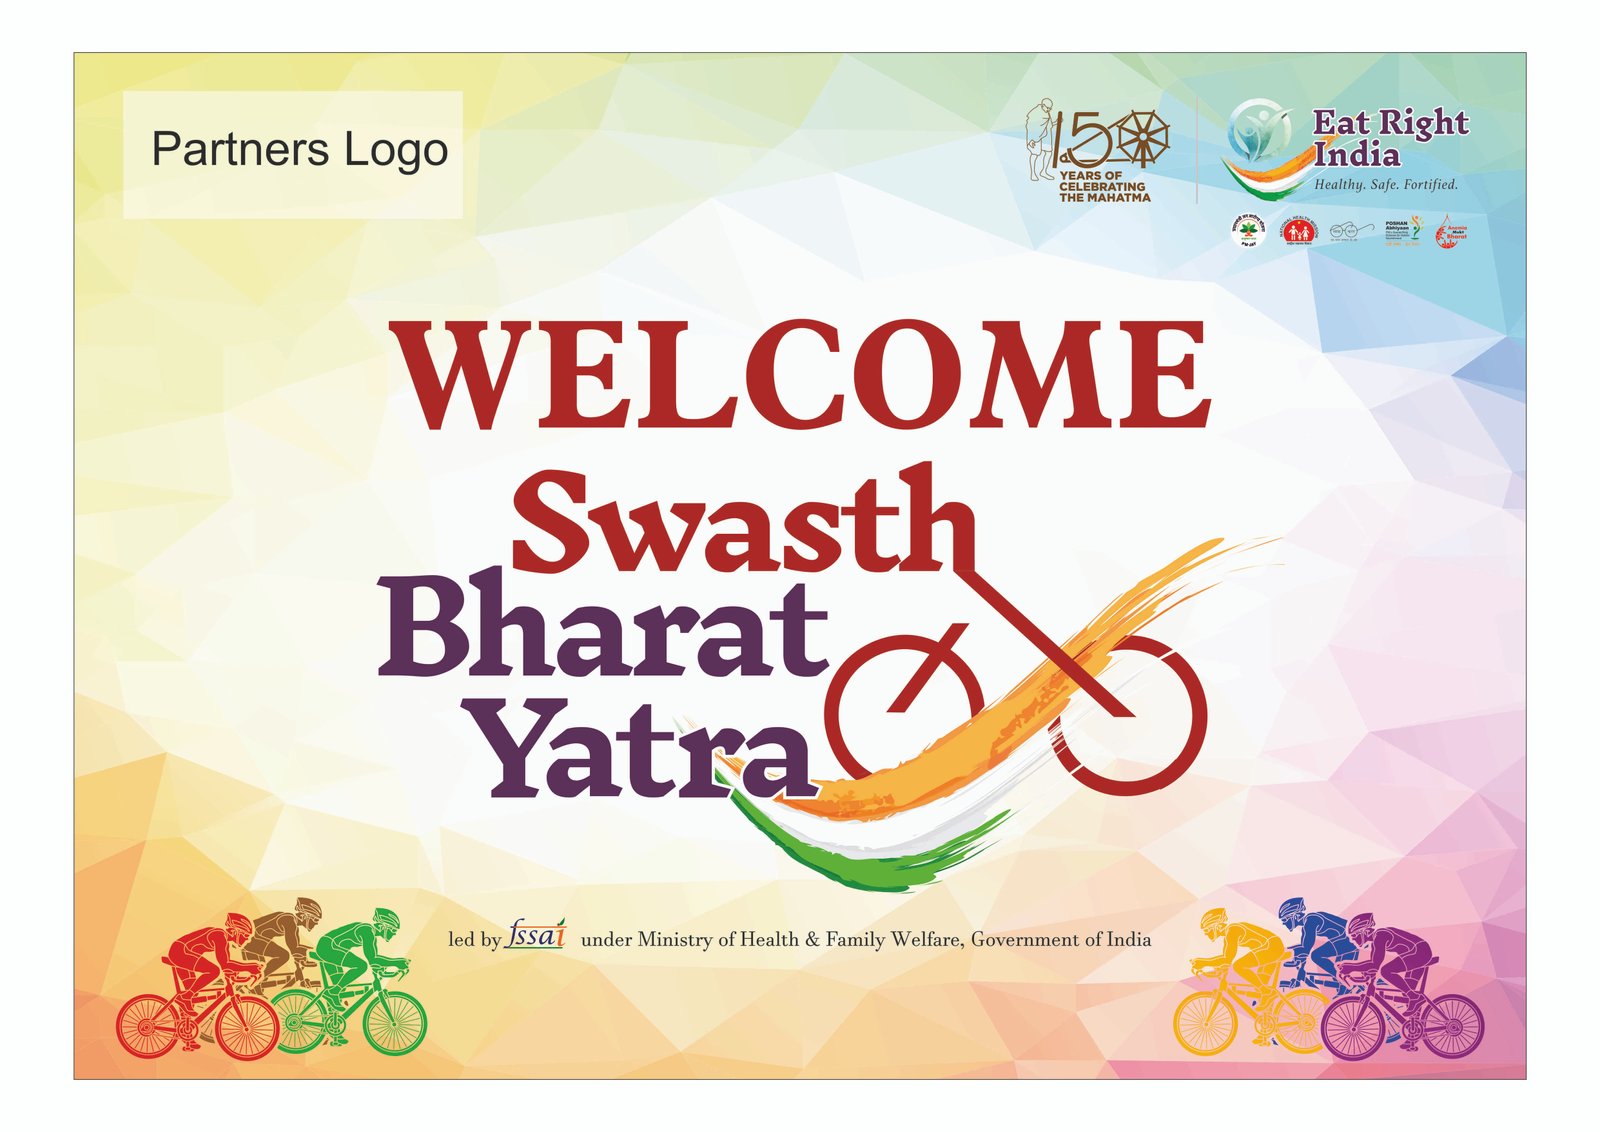 fssai-launches-swasth-bharat-yatra-to-promote-eat-right